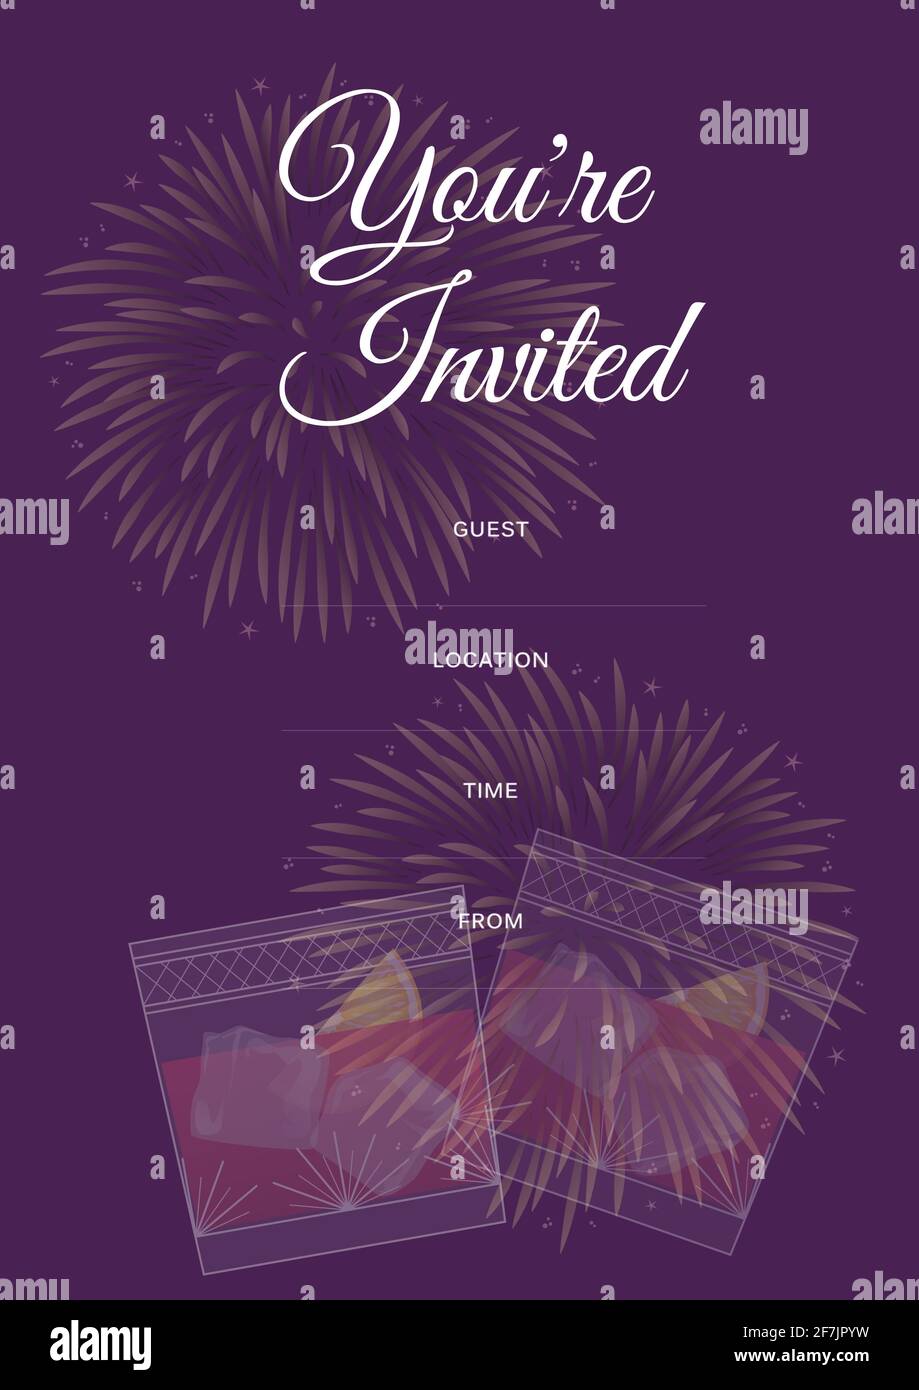 You're invited written in white with drinks design, invite with details space on purple background Stock Photo